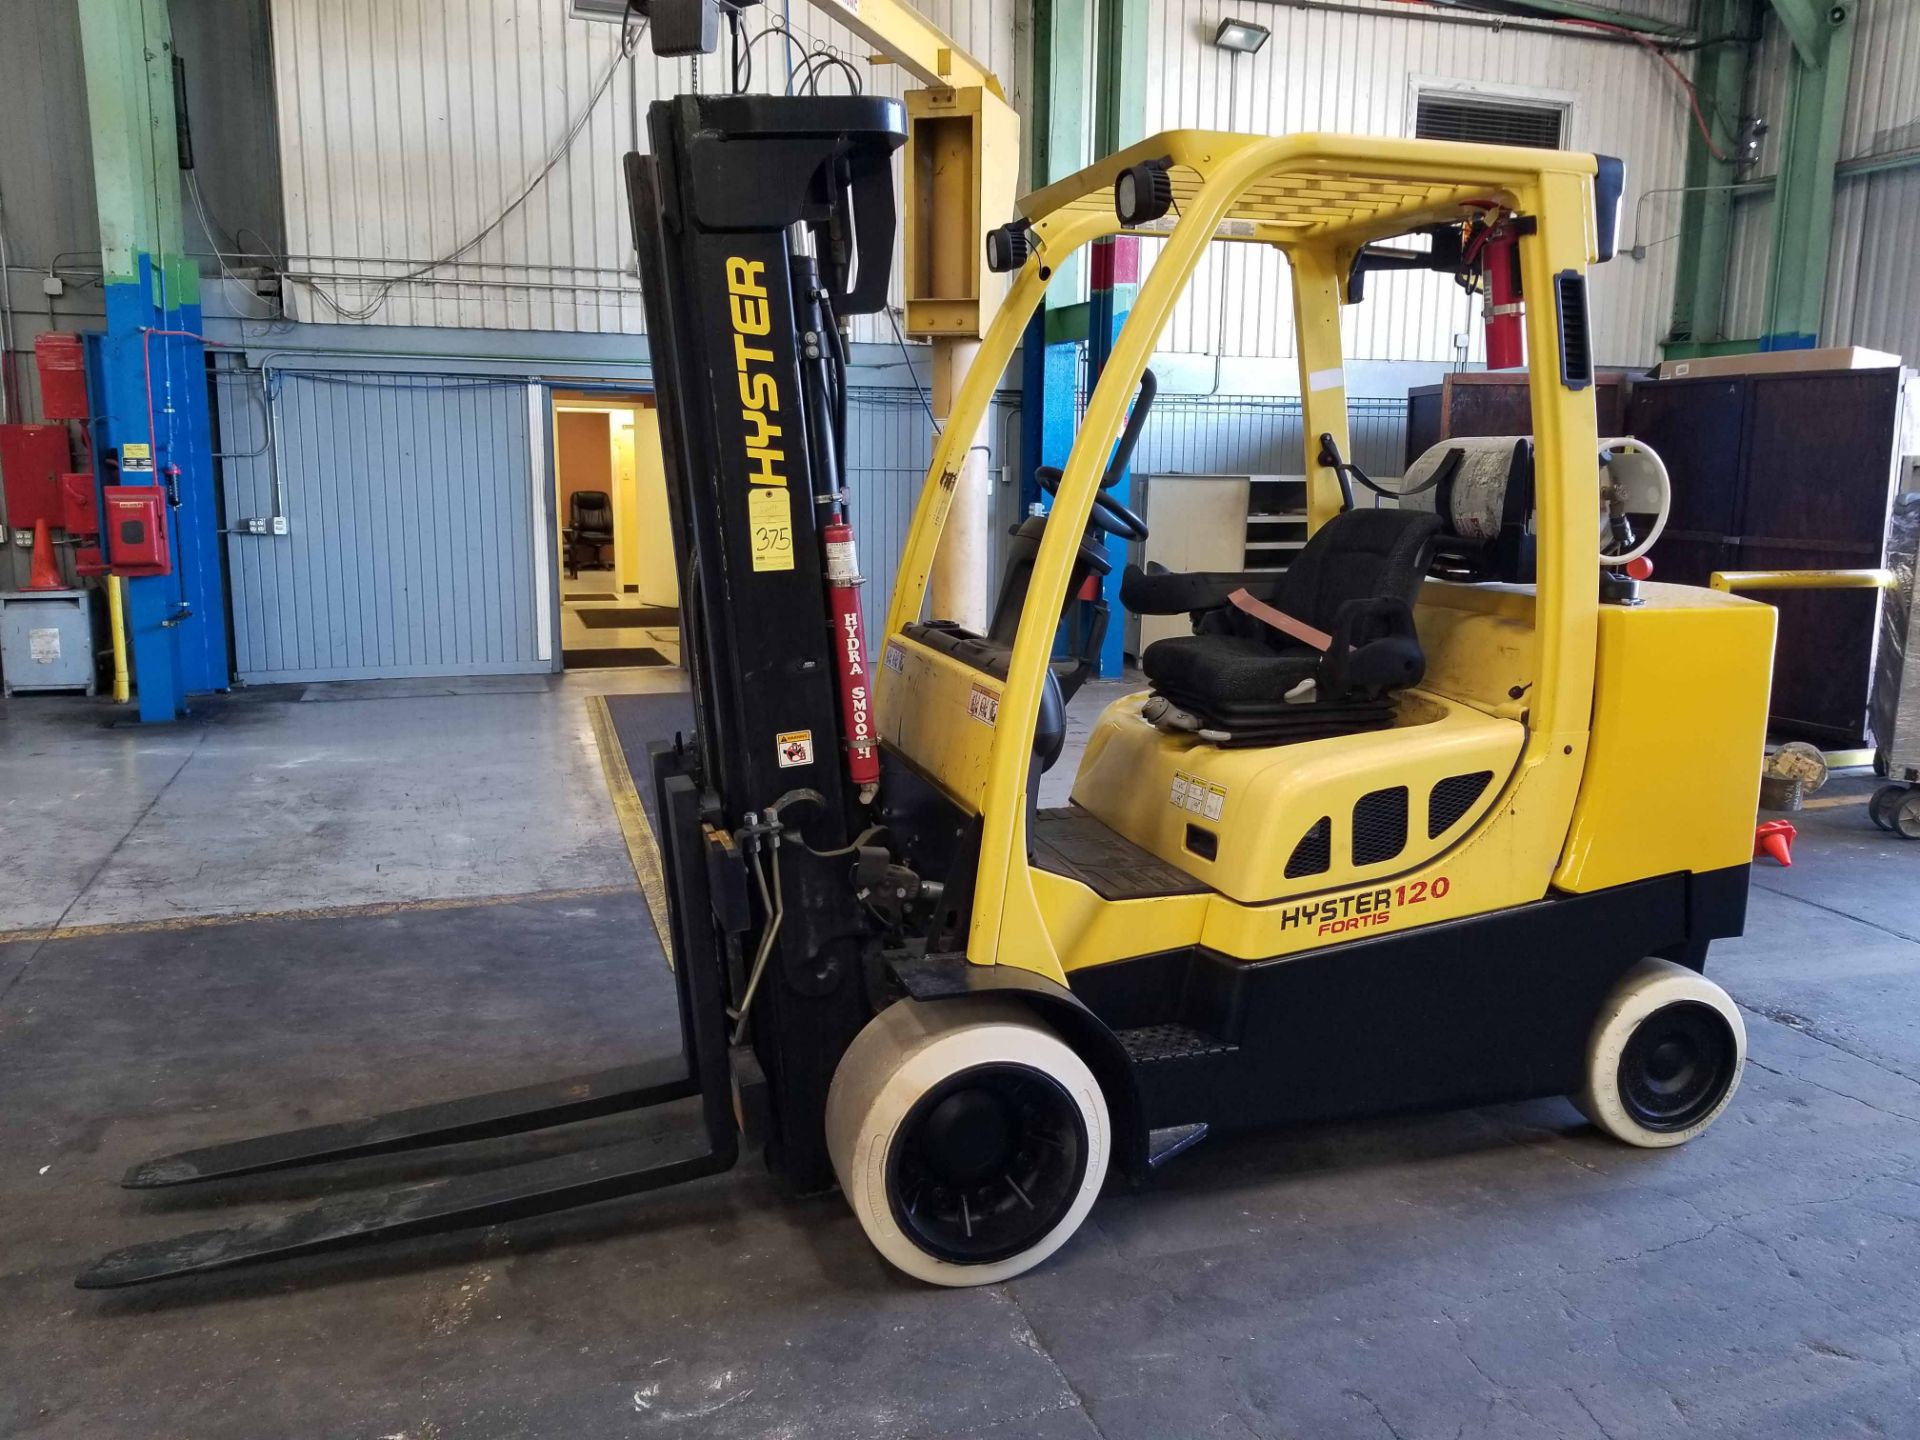 FORKLIFT, HYSTER 12,000 LB. CAP. MDL. S120FT, new 2011, LPG, 83” 3-stage mast, 163” max. lift